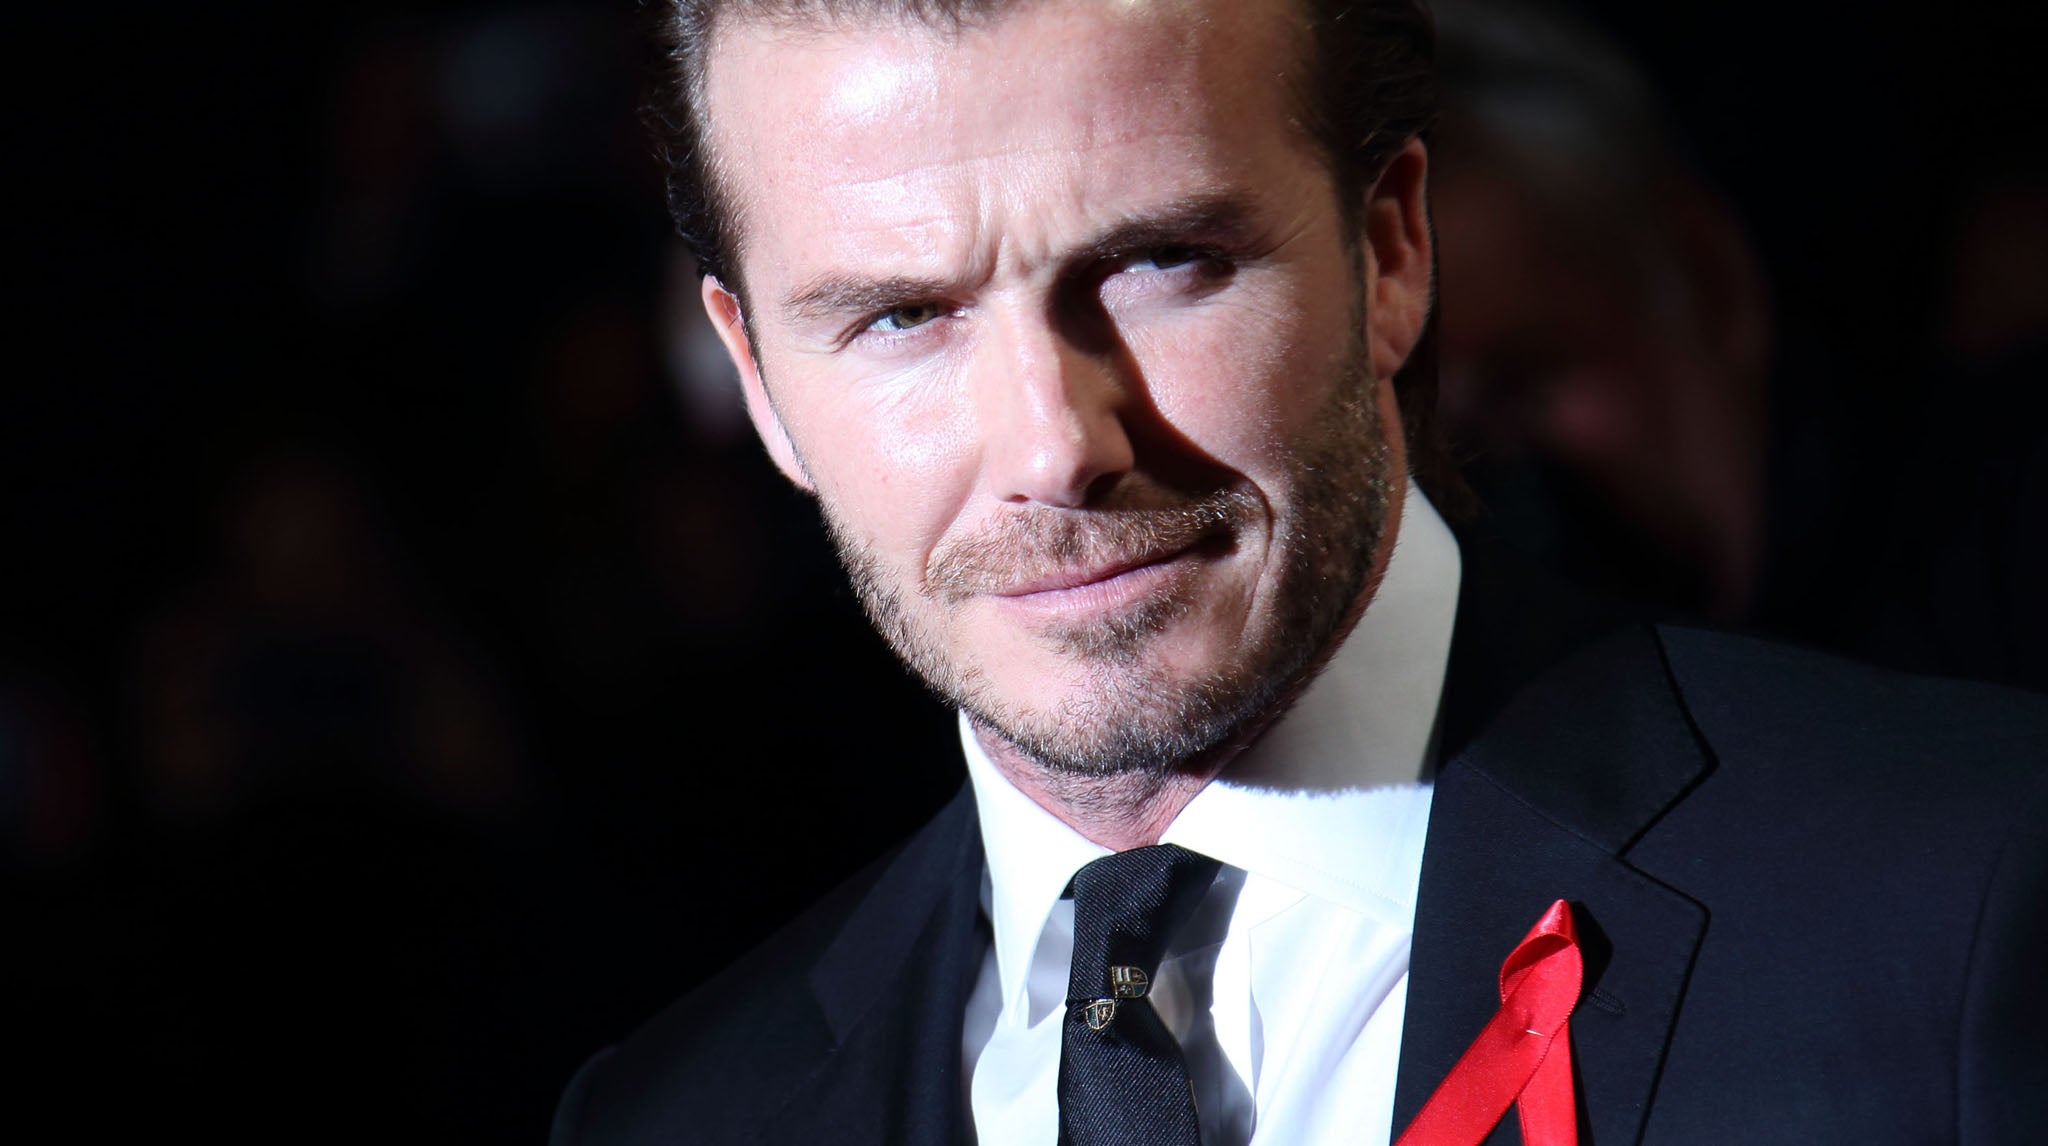 Beckham’s dreams of becoming a ‘Sir David’ – and the resultant headlines about ‘Britain’s other royal family’ – were all but dashed when the New Year Honours List was finally revealed